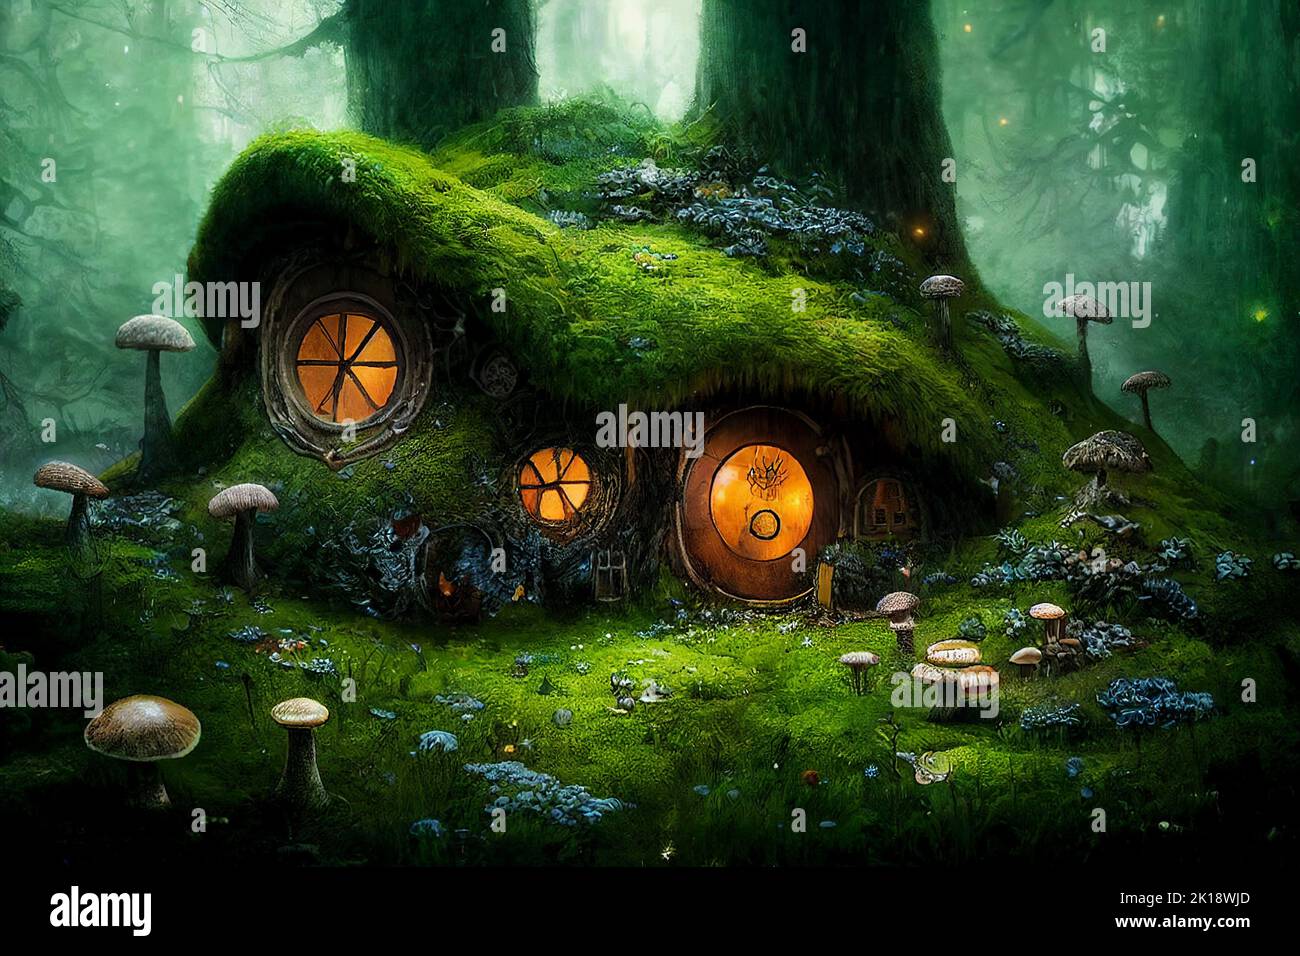 Hobbit house in the forest 3d illustration. AI generated computer graphics Stock Photo